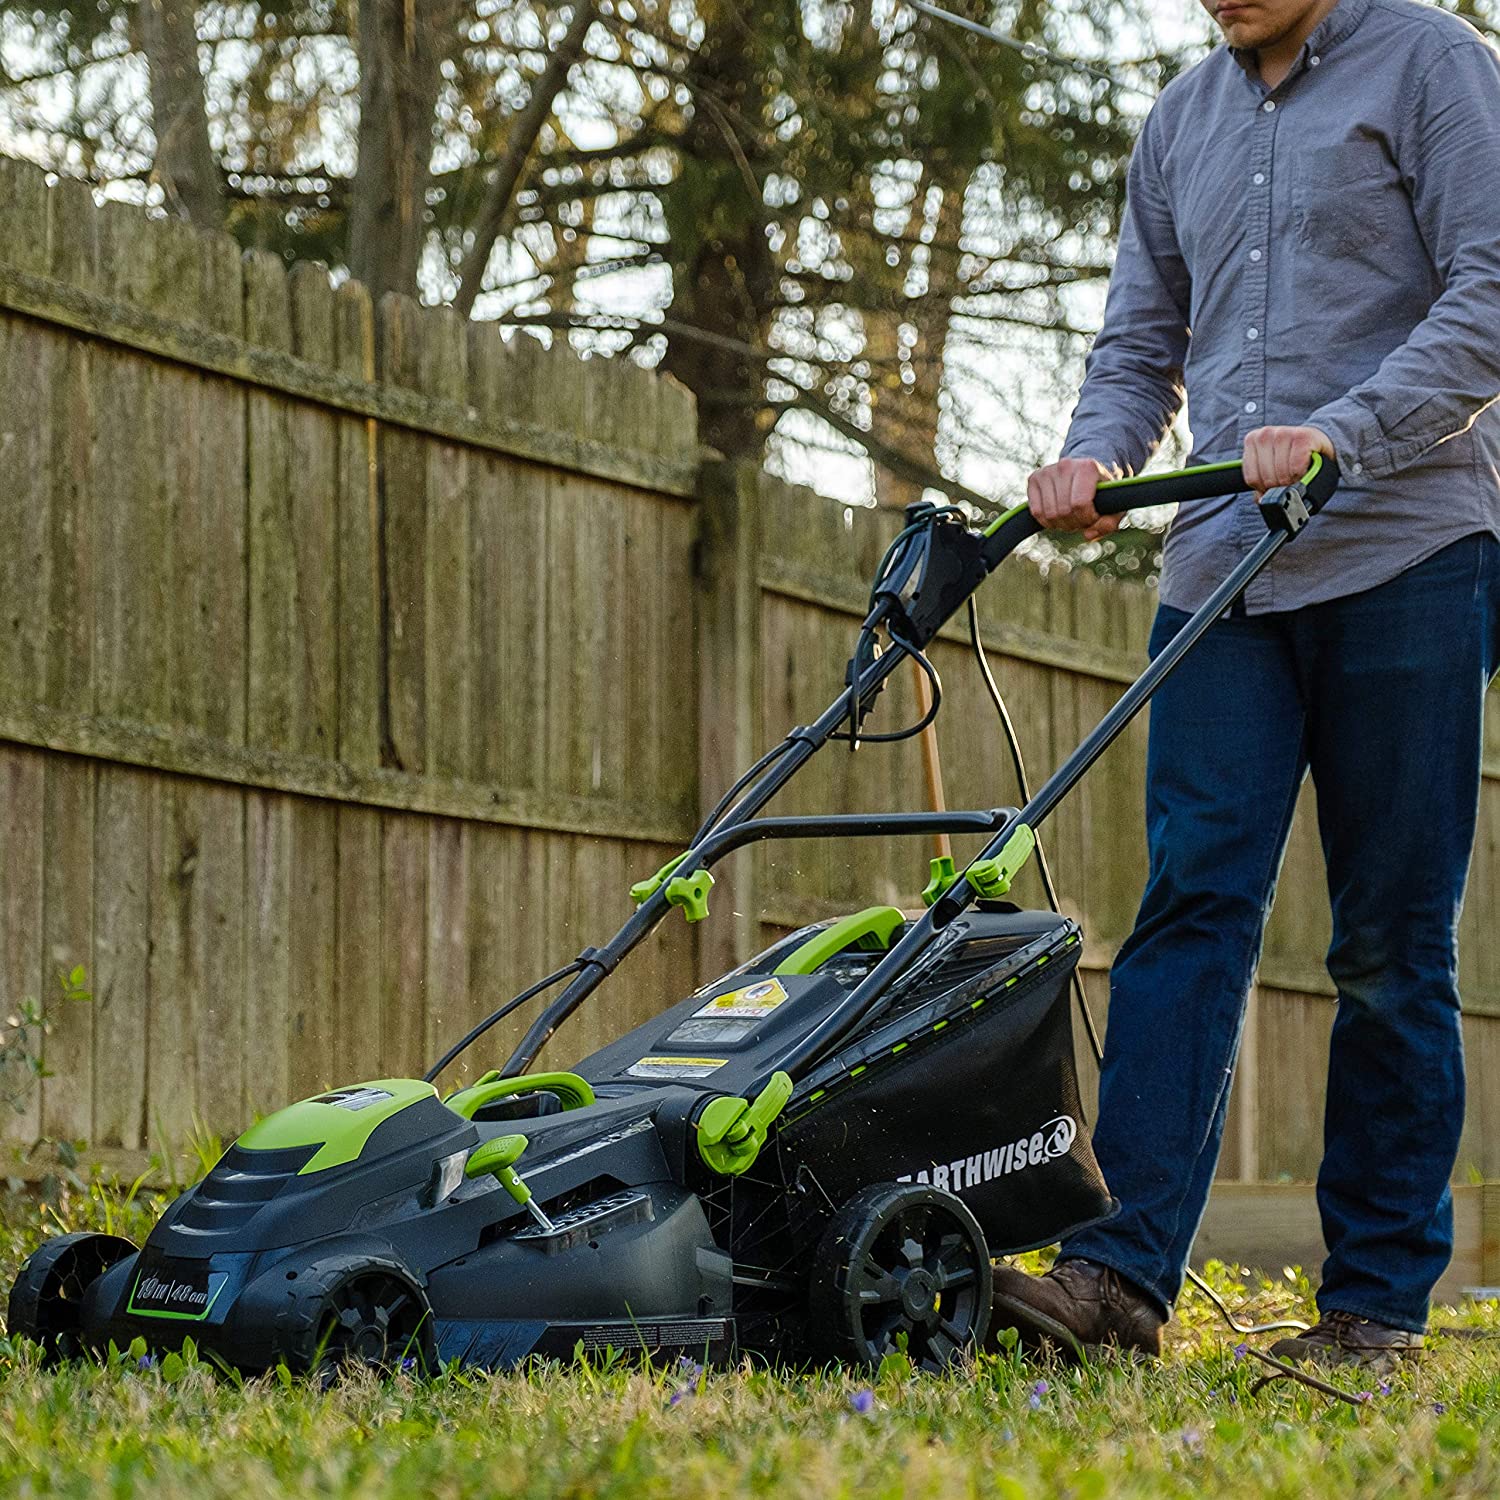 Earthwise Power Tools by ALM 19" Corded Electric Mower